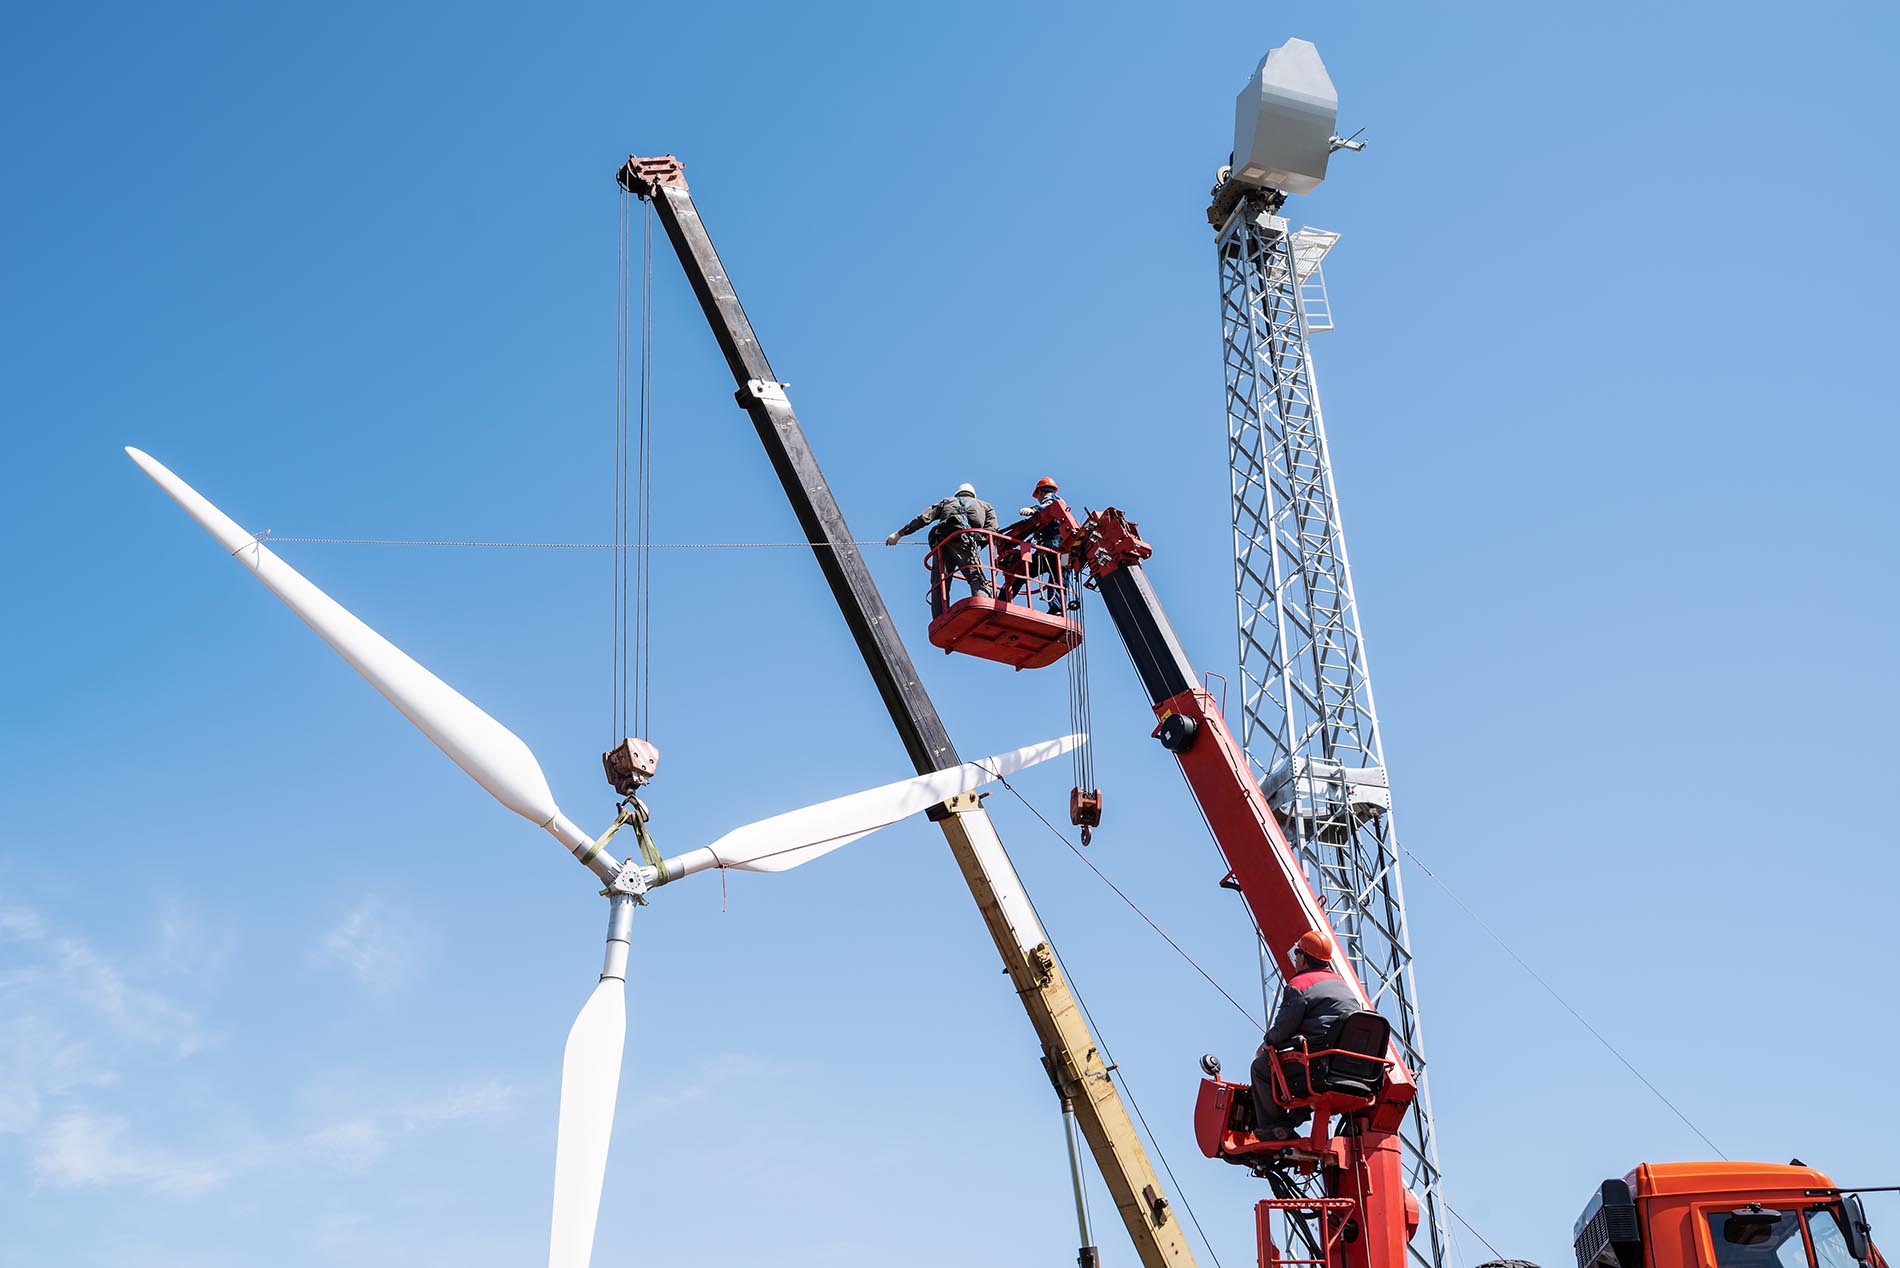 Construction of a wind power plant. Installers use a truck crane and aerial platform to raise the wind turbine rotor.